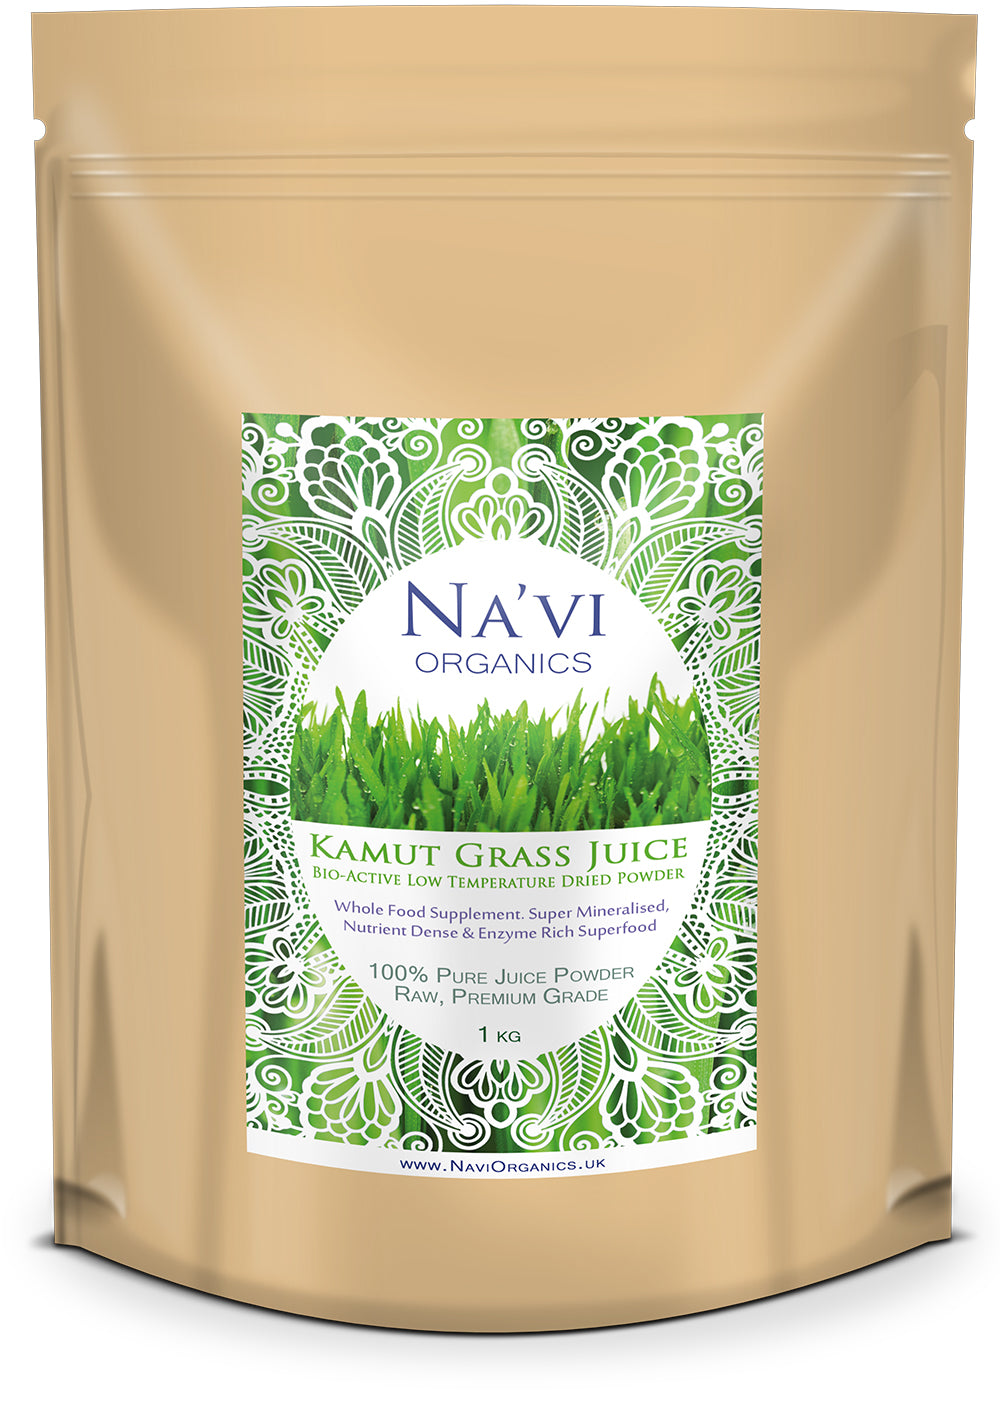 1kg resealable pouch of Kamut Wheatgrass